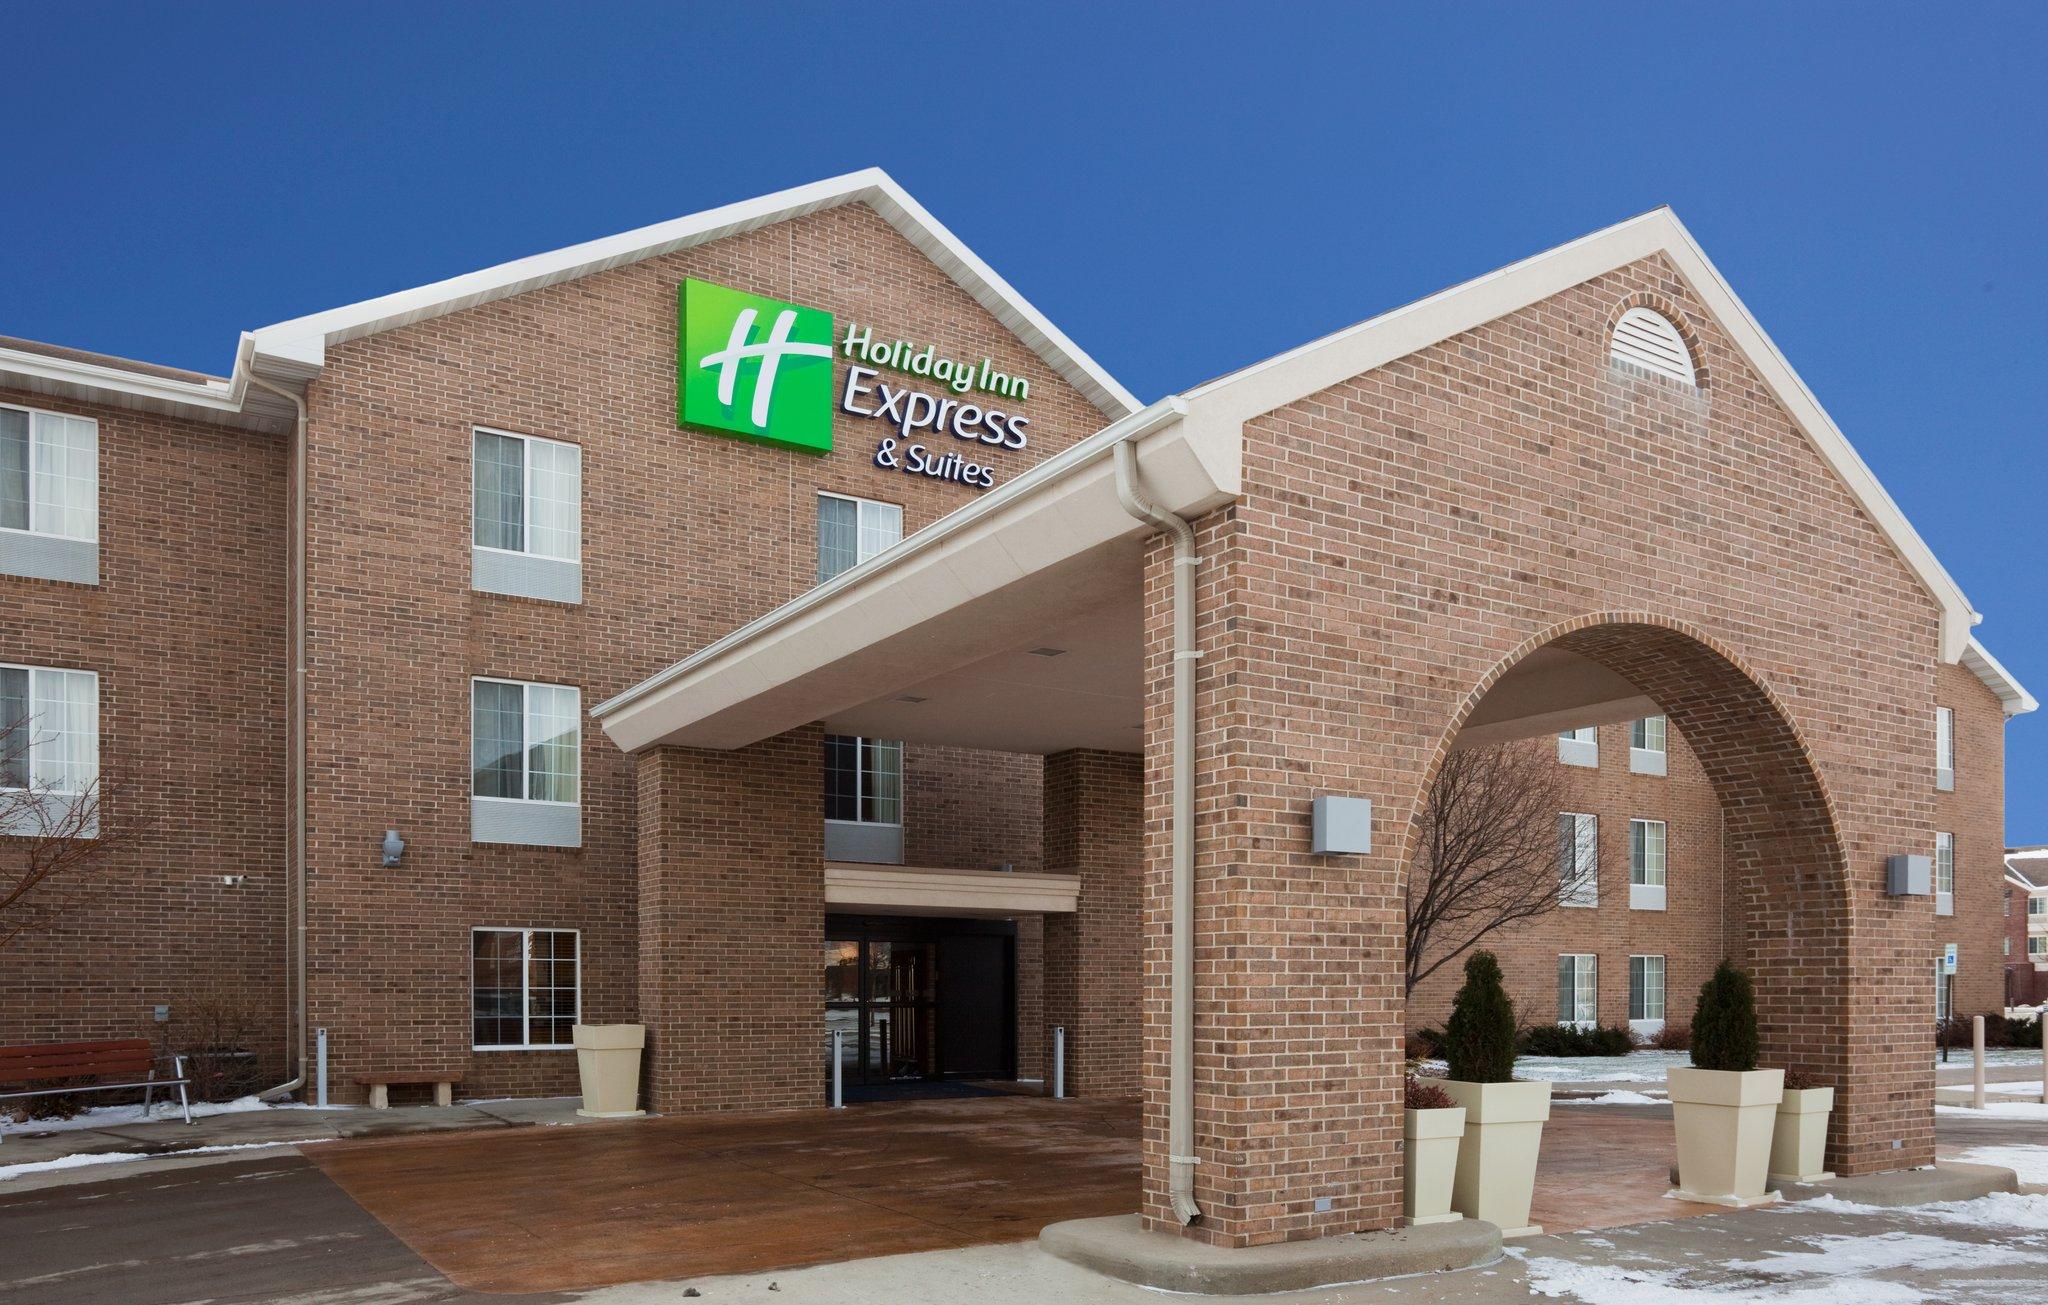 Holiday Inn Express & Suites Sioux Falls At Empire Mall in Sioux Falls, SD